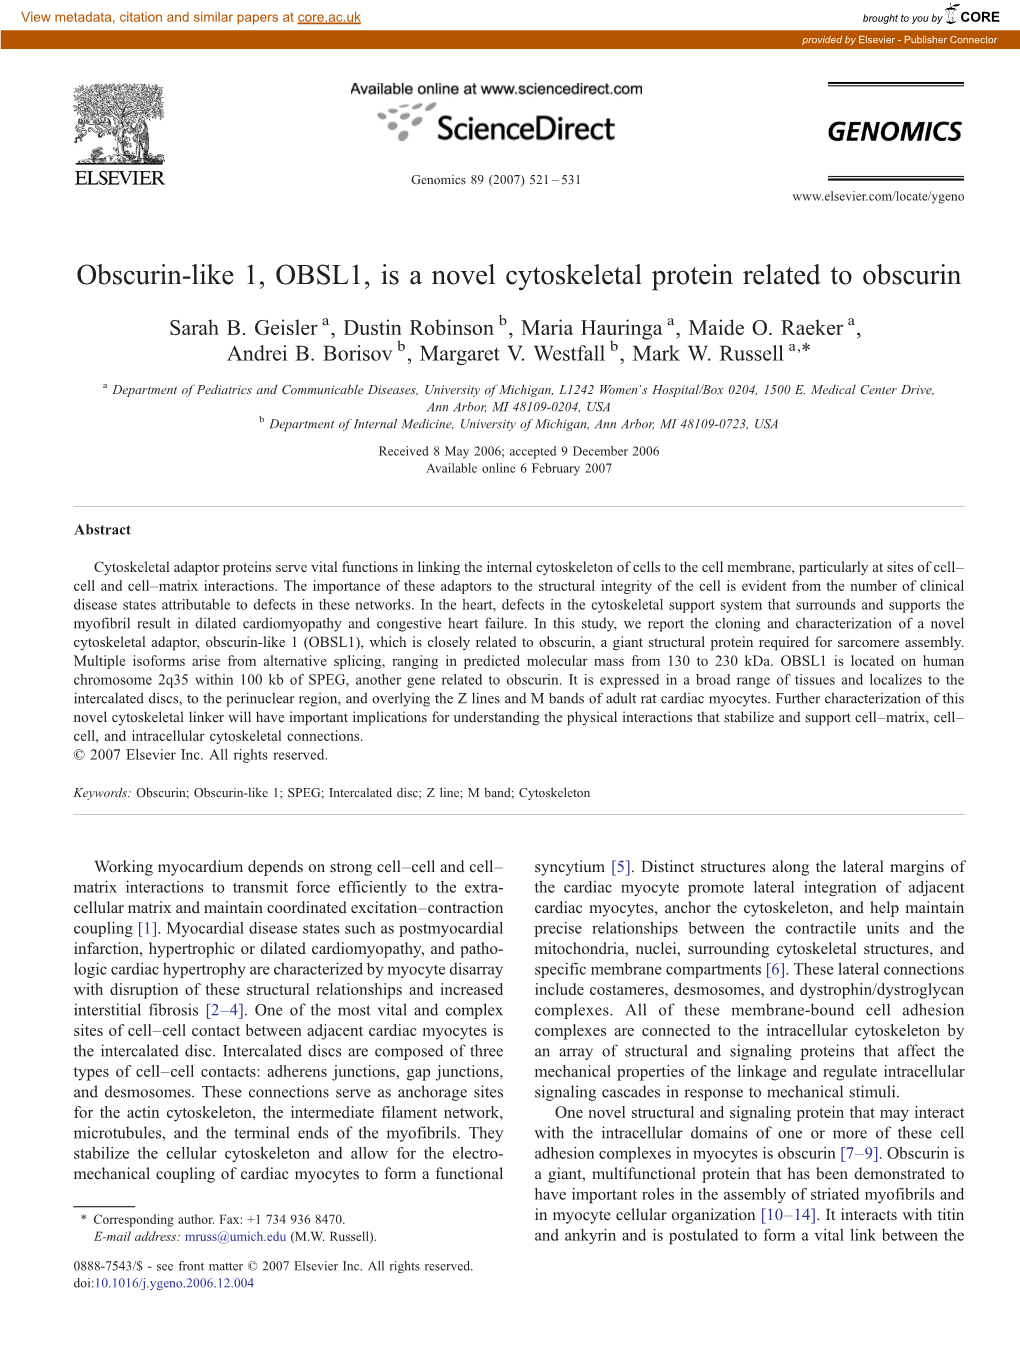 Obscurin-Like 1, OBSL1, Is a Novel Cytoskeletal Protein Related to Obscurin